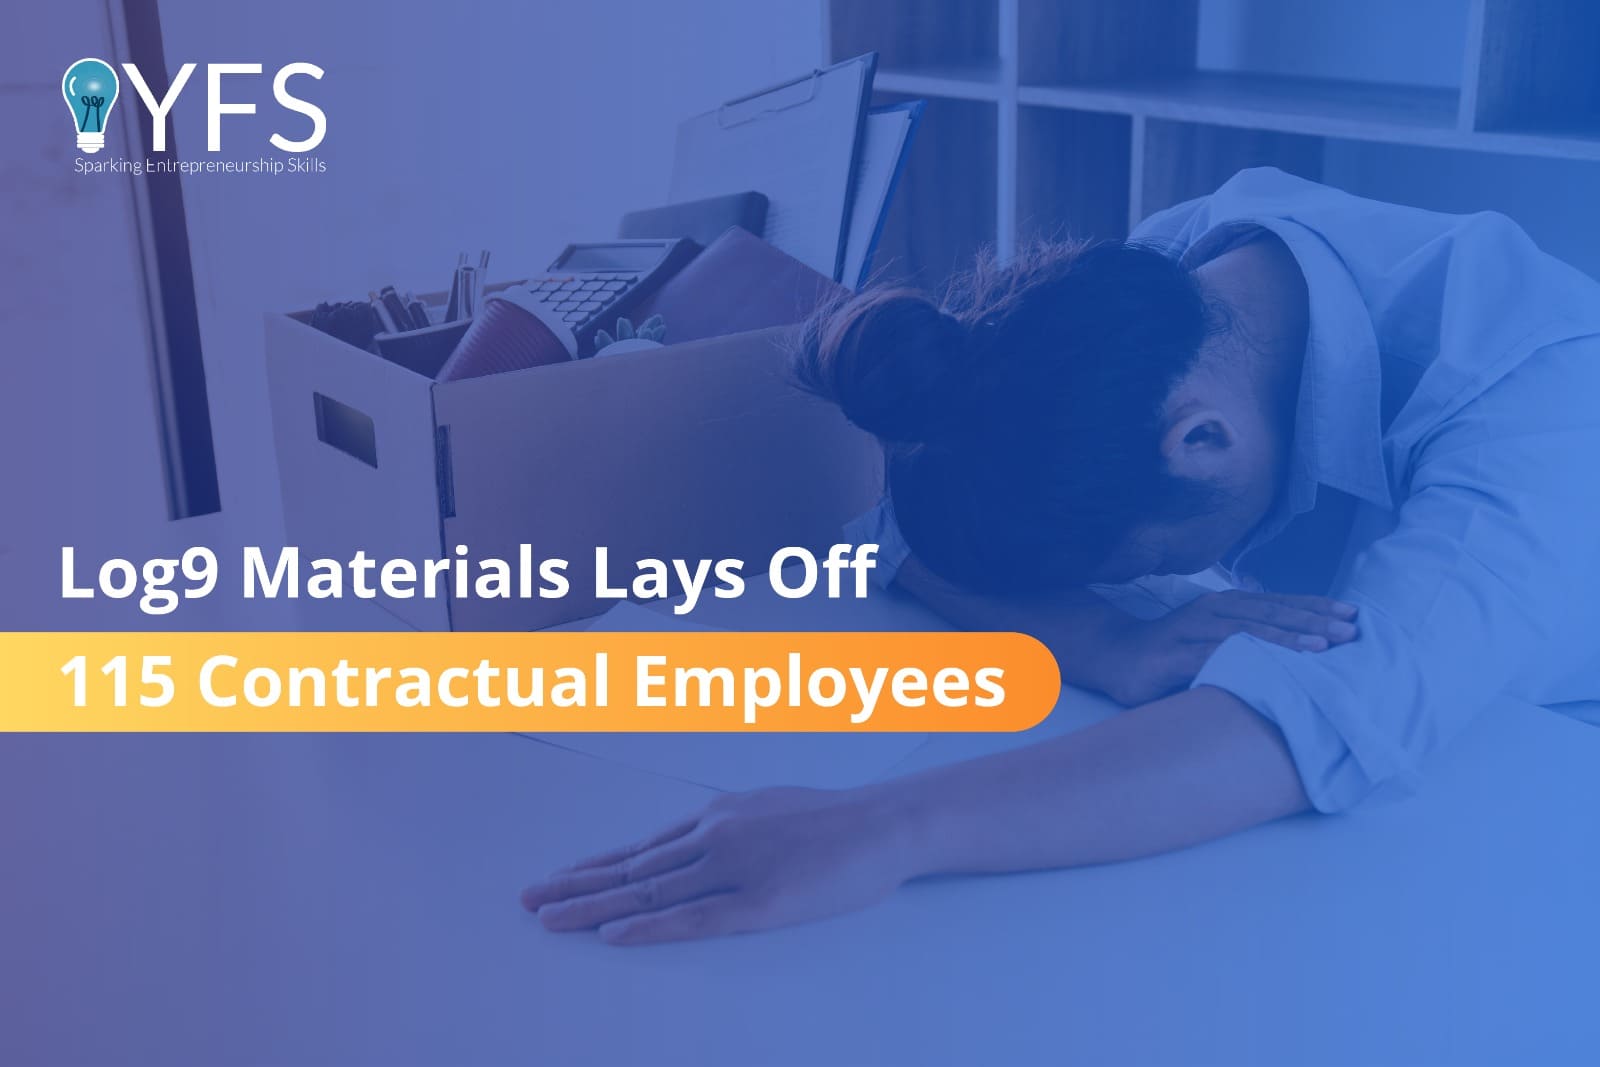 Log9 Materials Lays Off 115 Contractual Employees